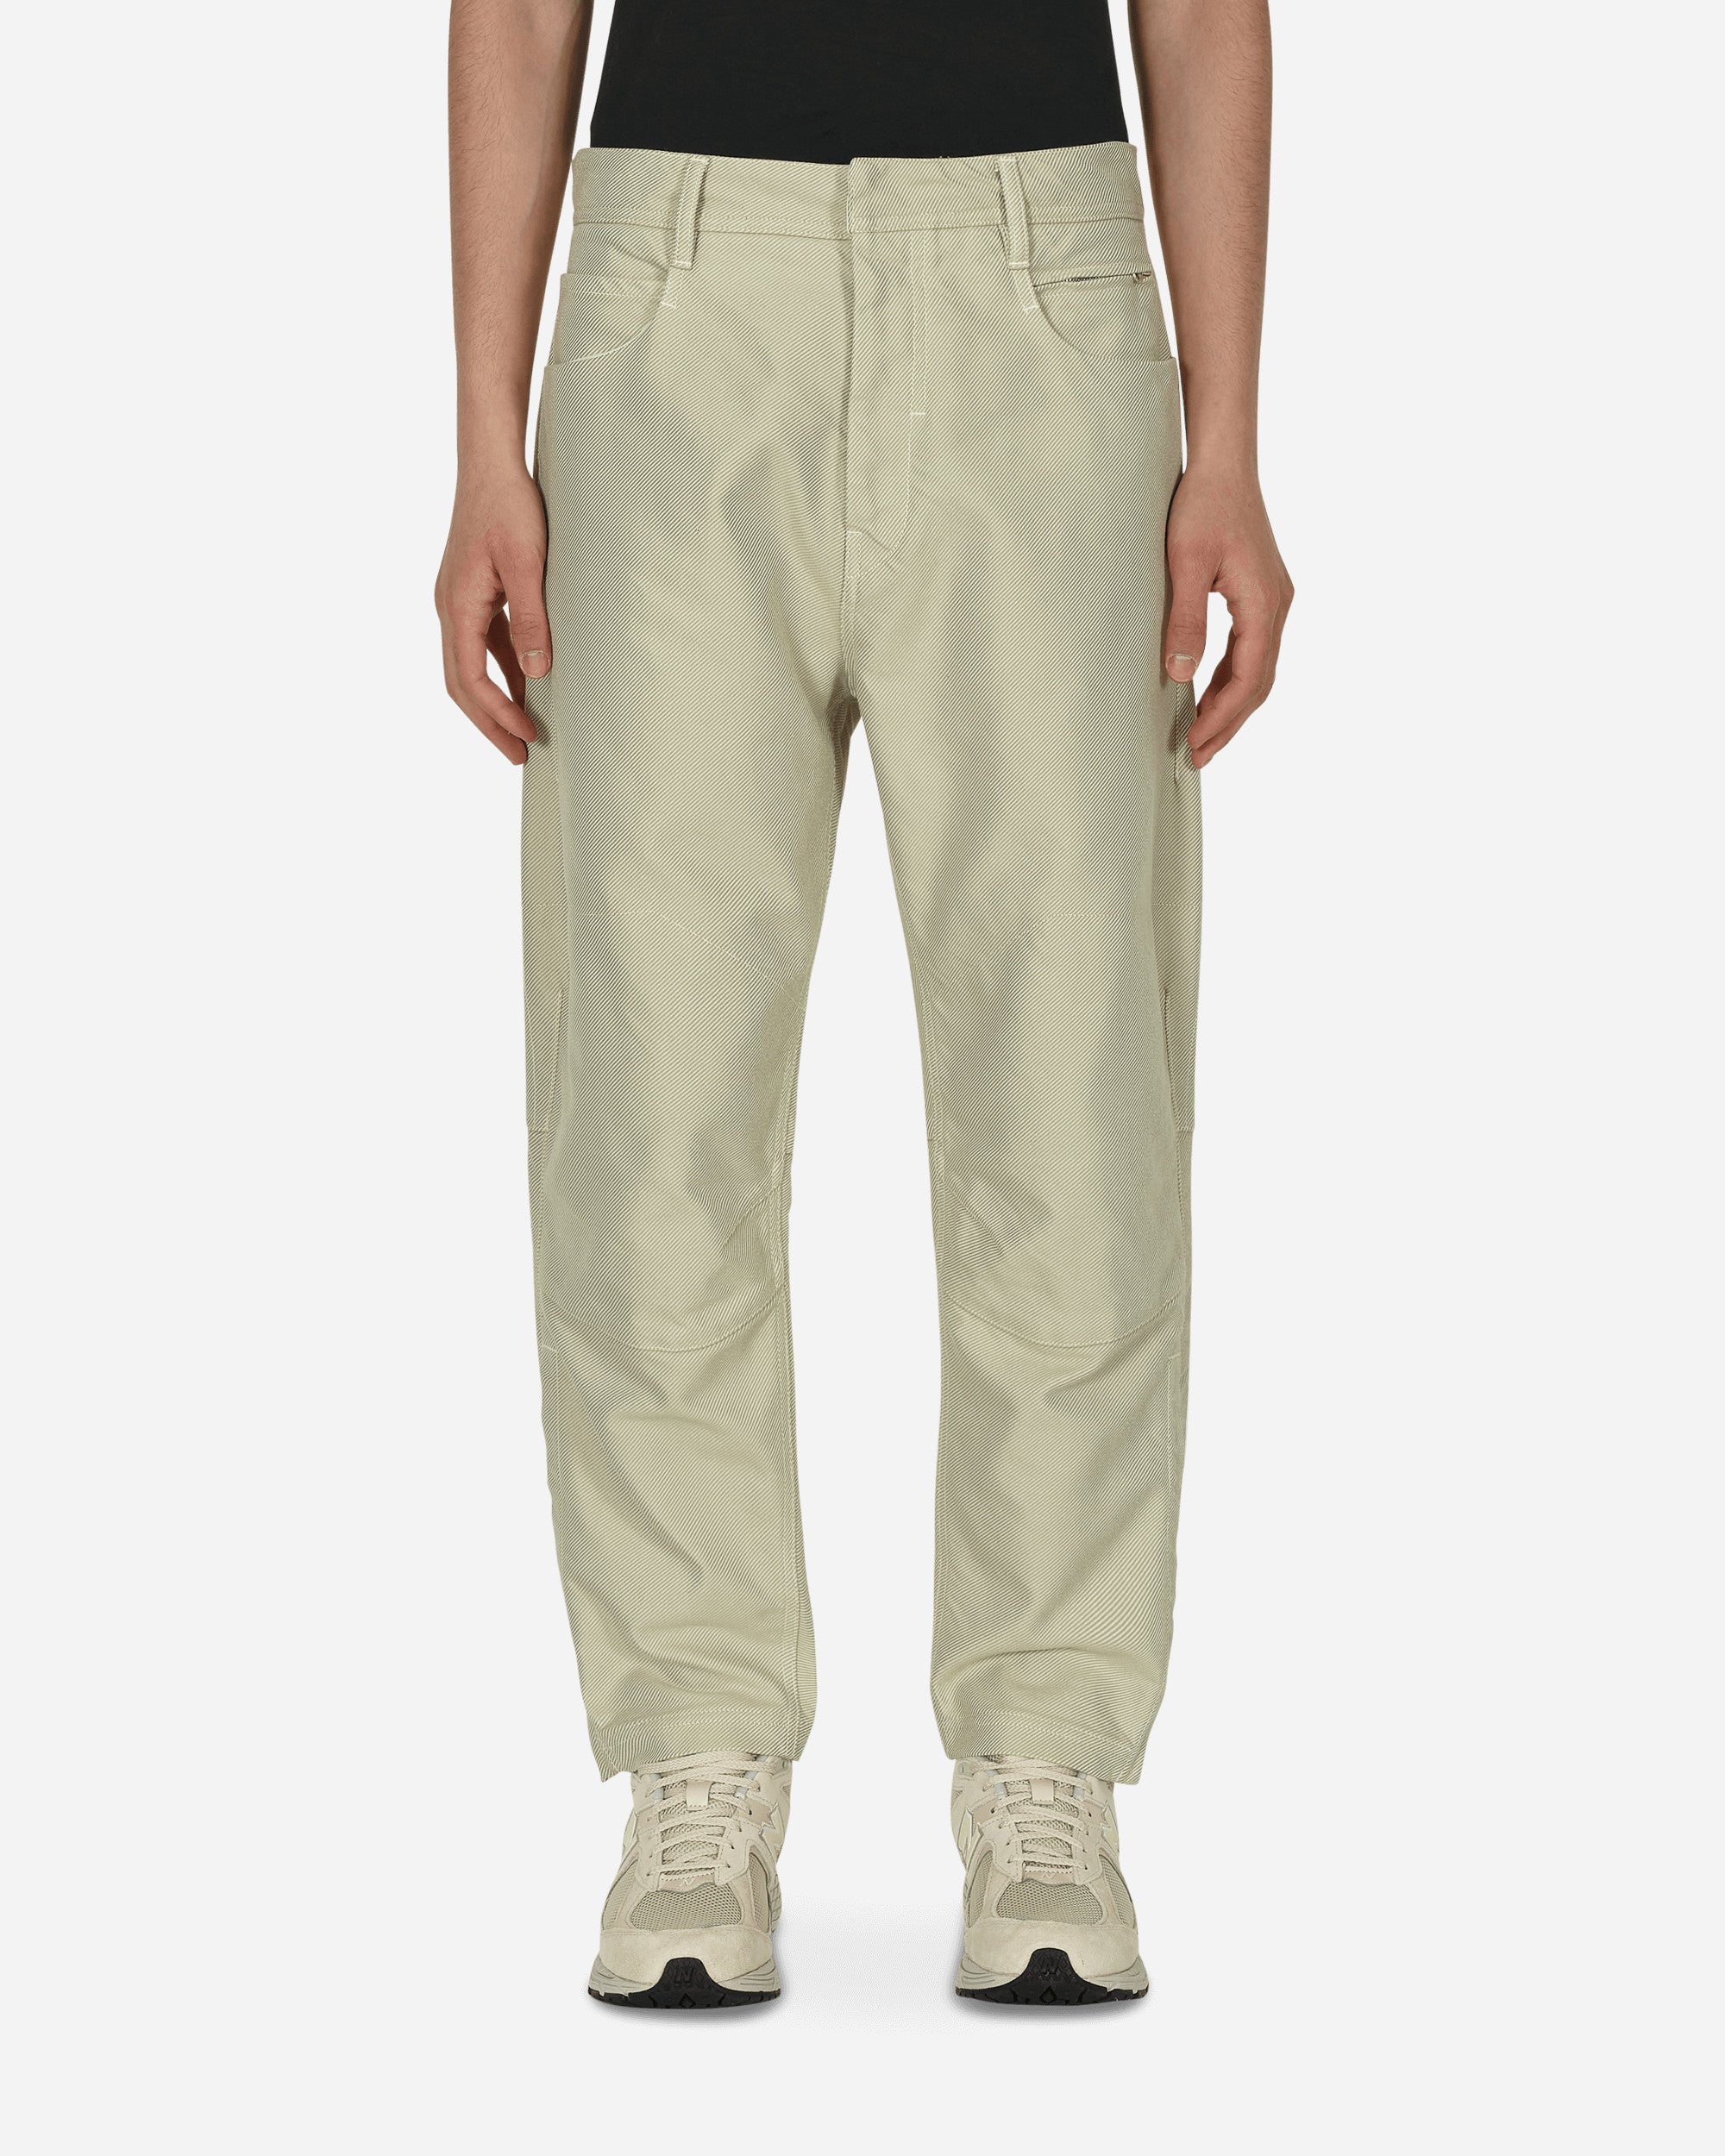 Stone Island Shadow Project Rider 5.5 Pocket Pants Natural Beige Pants Trousers 771930515 V0091